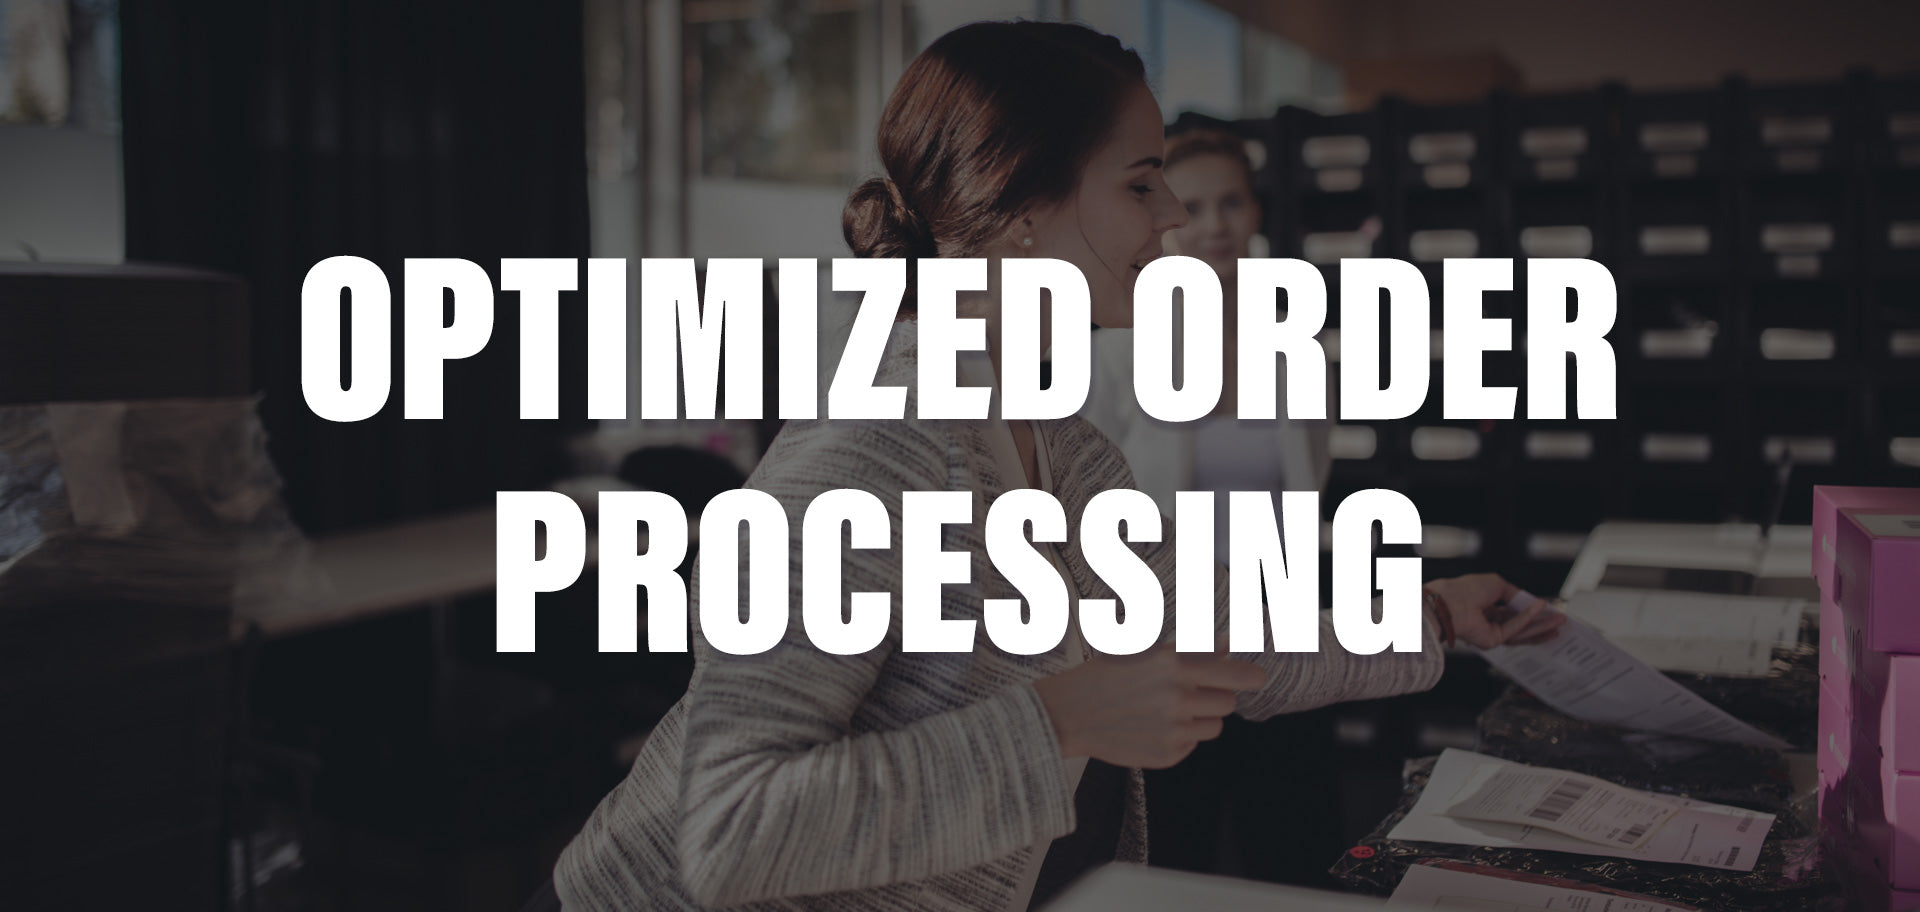 Shopify, Packrooster Shipping & Optimized order processing